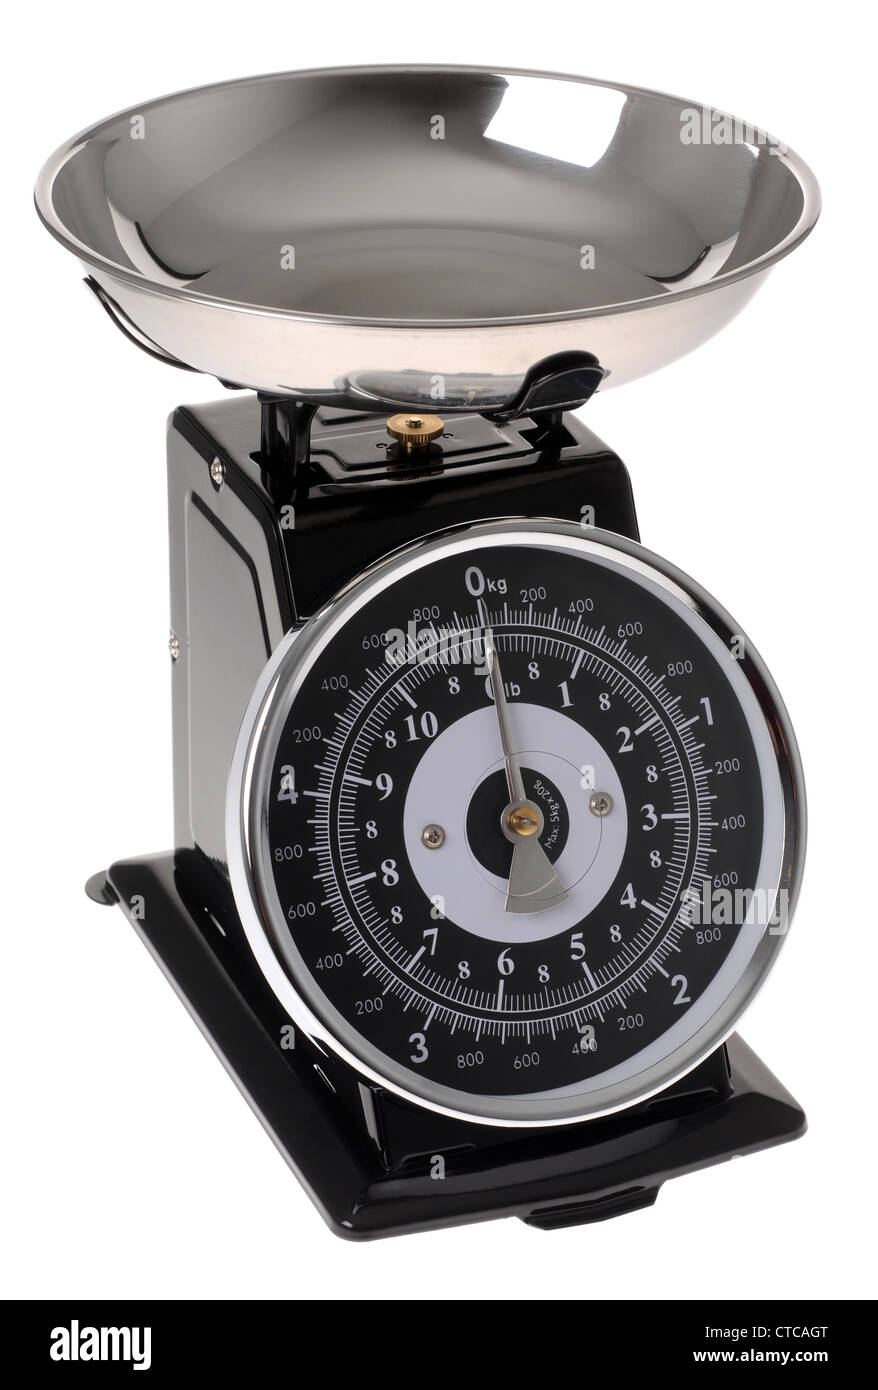 https://c8.alamy.com/comp/CTCAGT/weighing-scales-on-a-white-background-weighing-machine-scale-CTCAGT.jpg